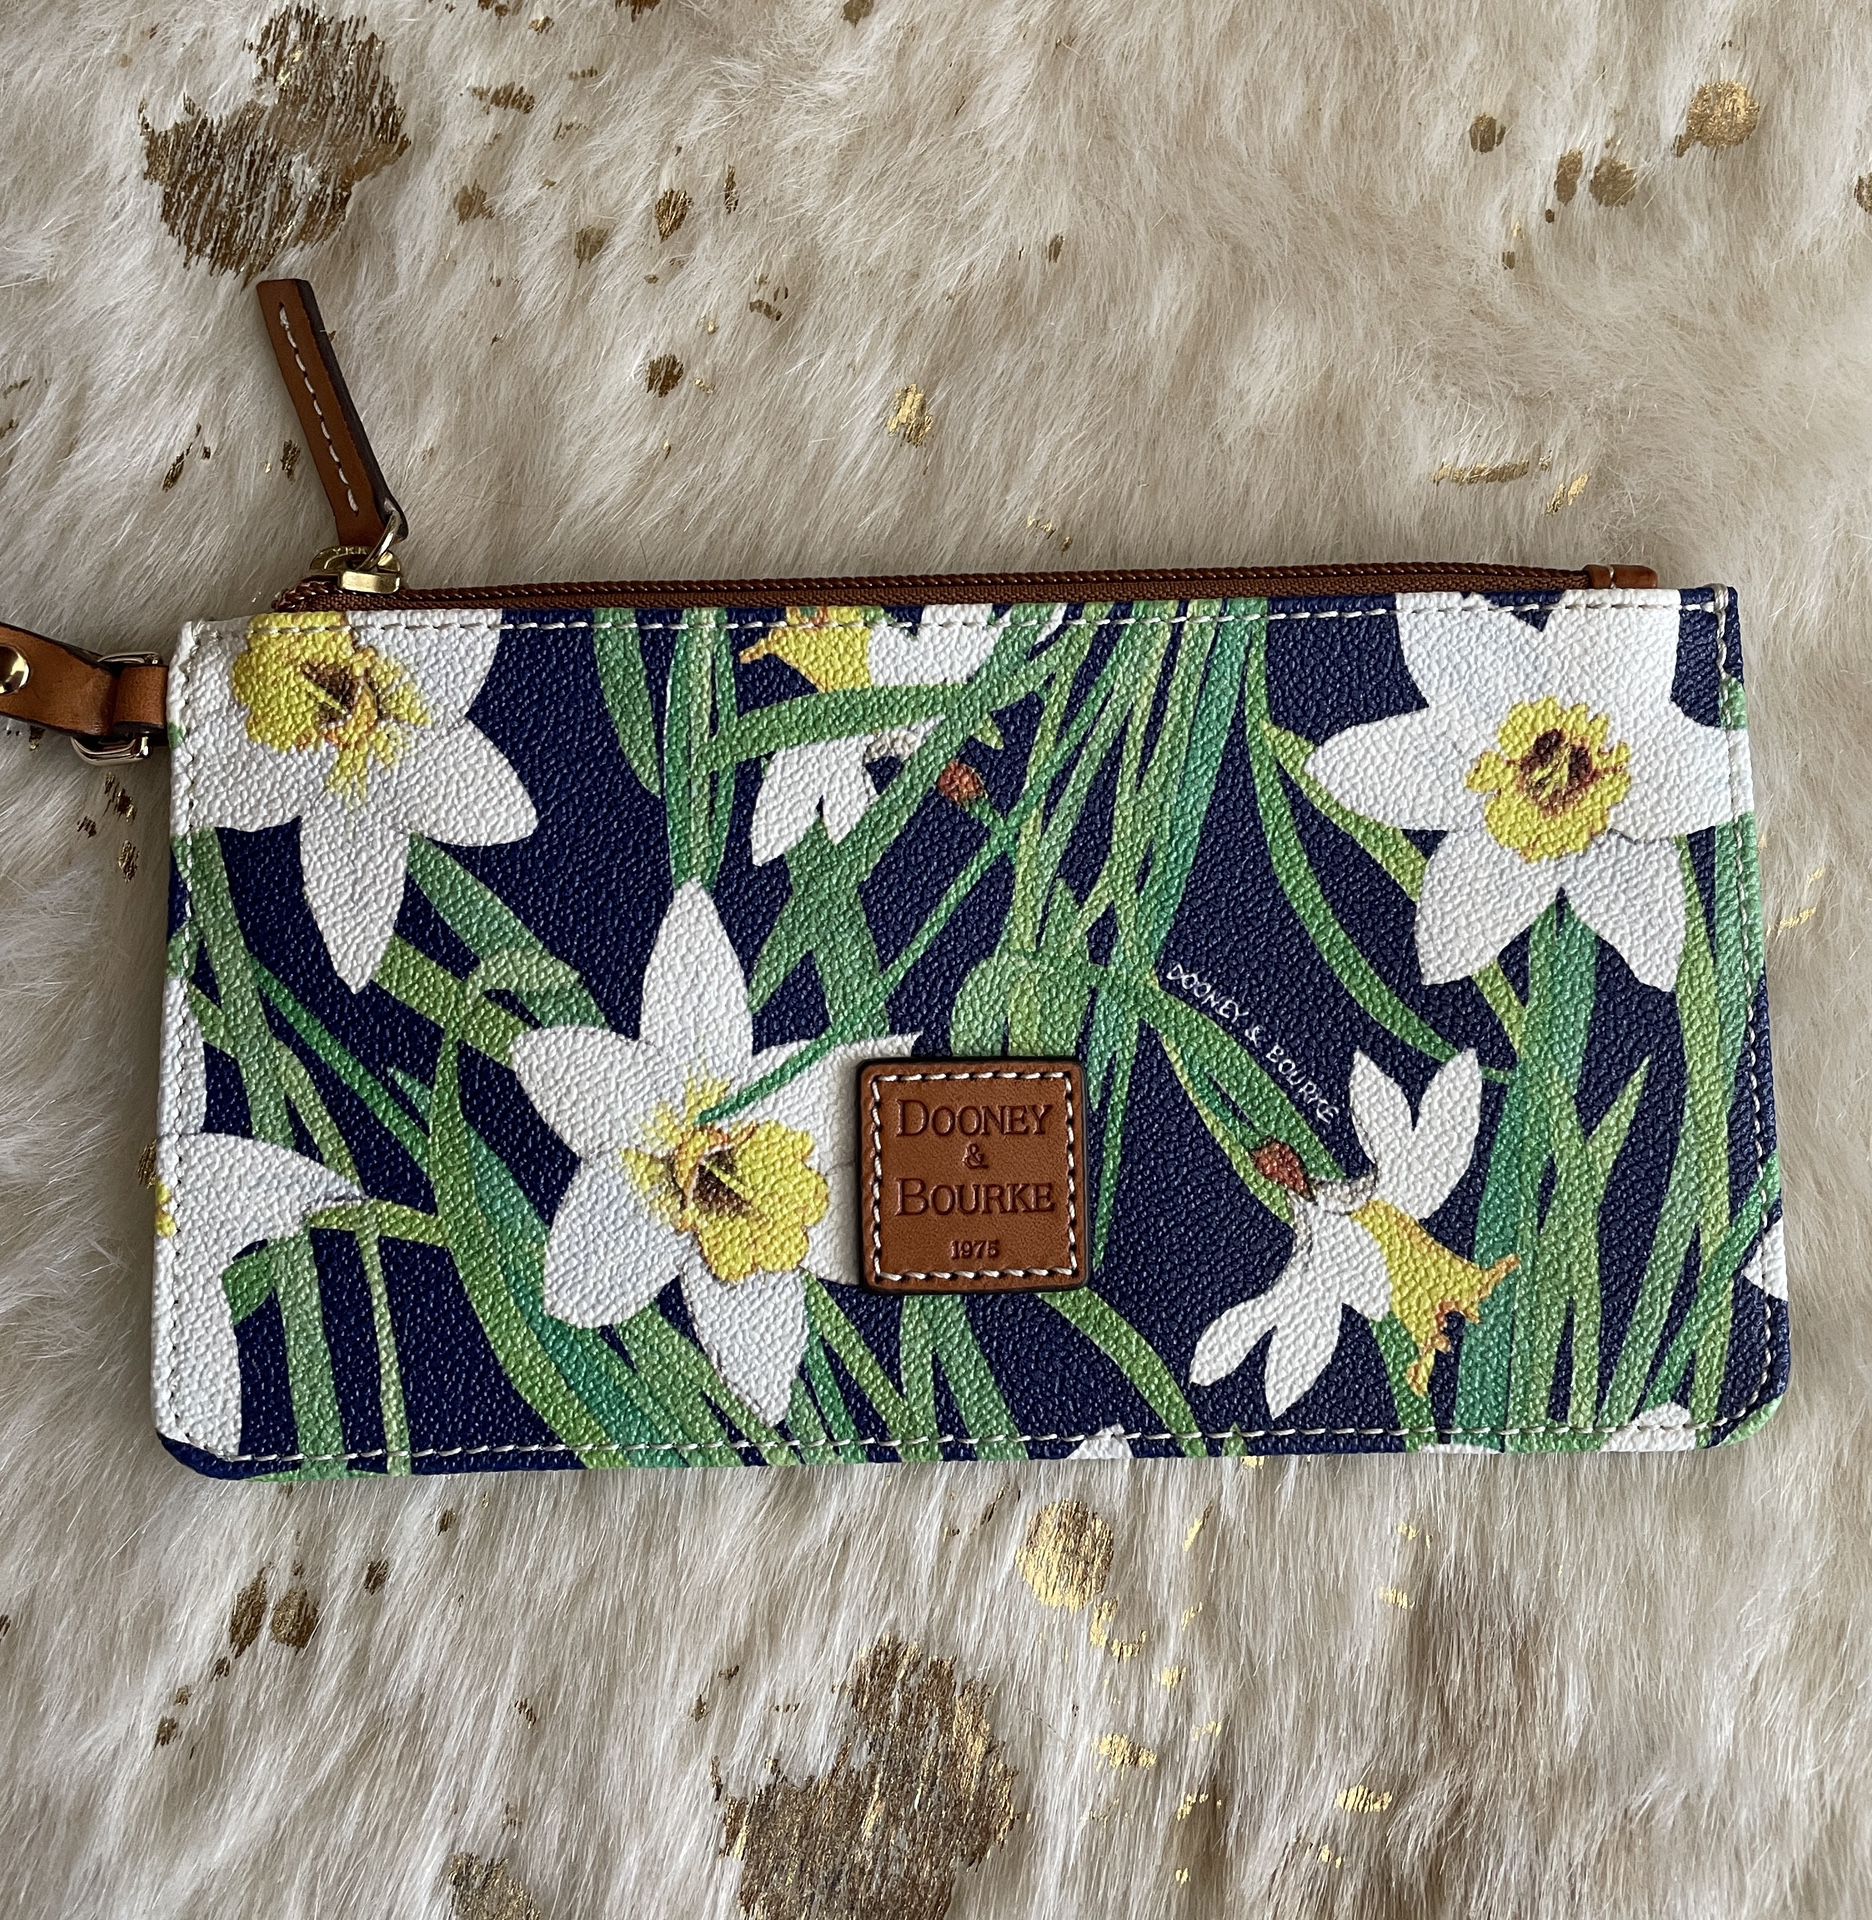 Dooney & Bourke Wristlet Daffodil Floral Blue White Coated Canvas Leather